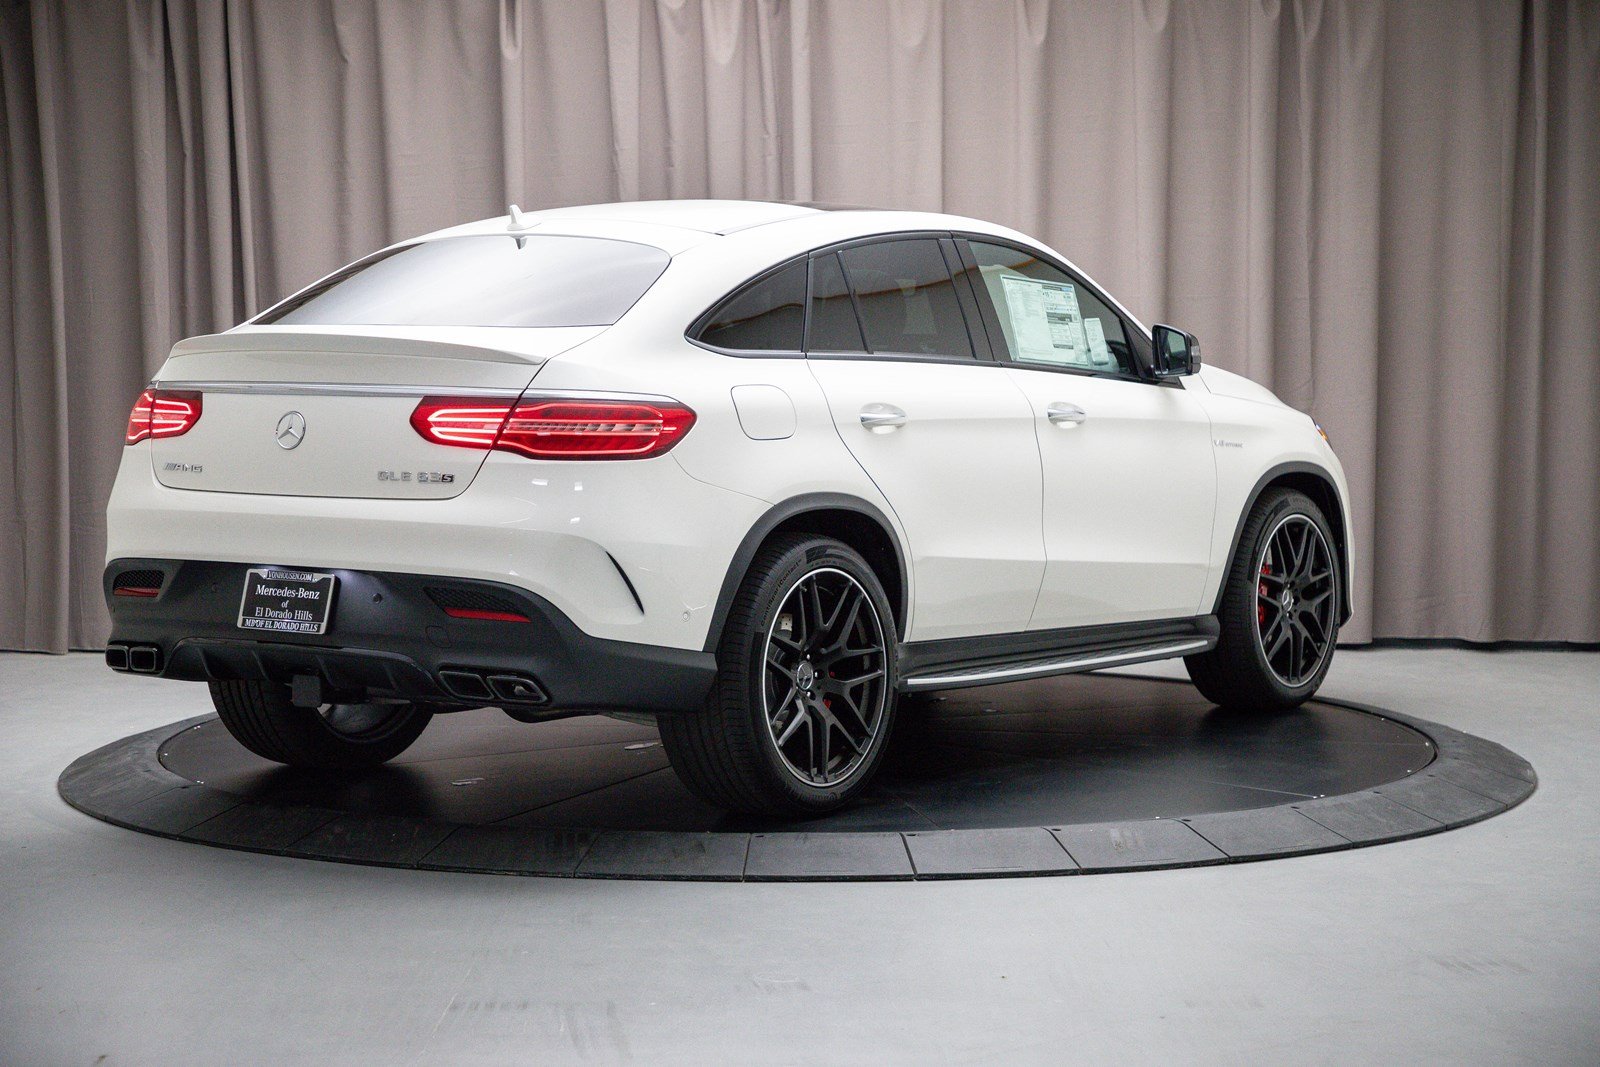 New 2019 Mercedes Benz Amg Gle 63 S 4matic Sport Utility